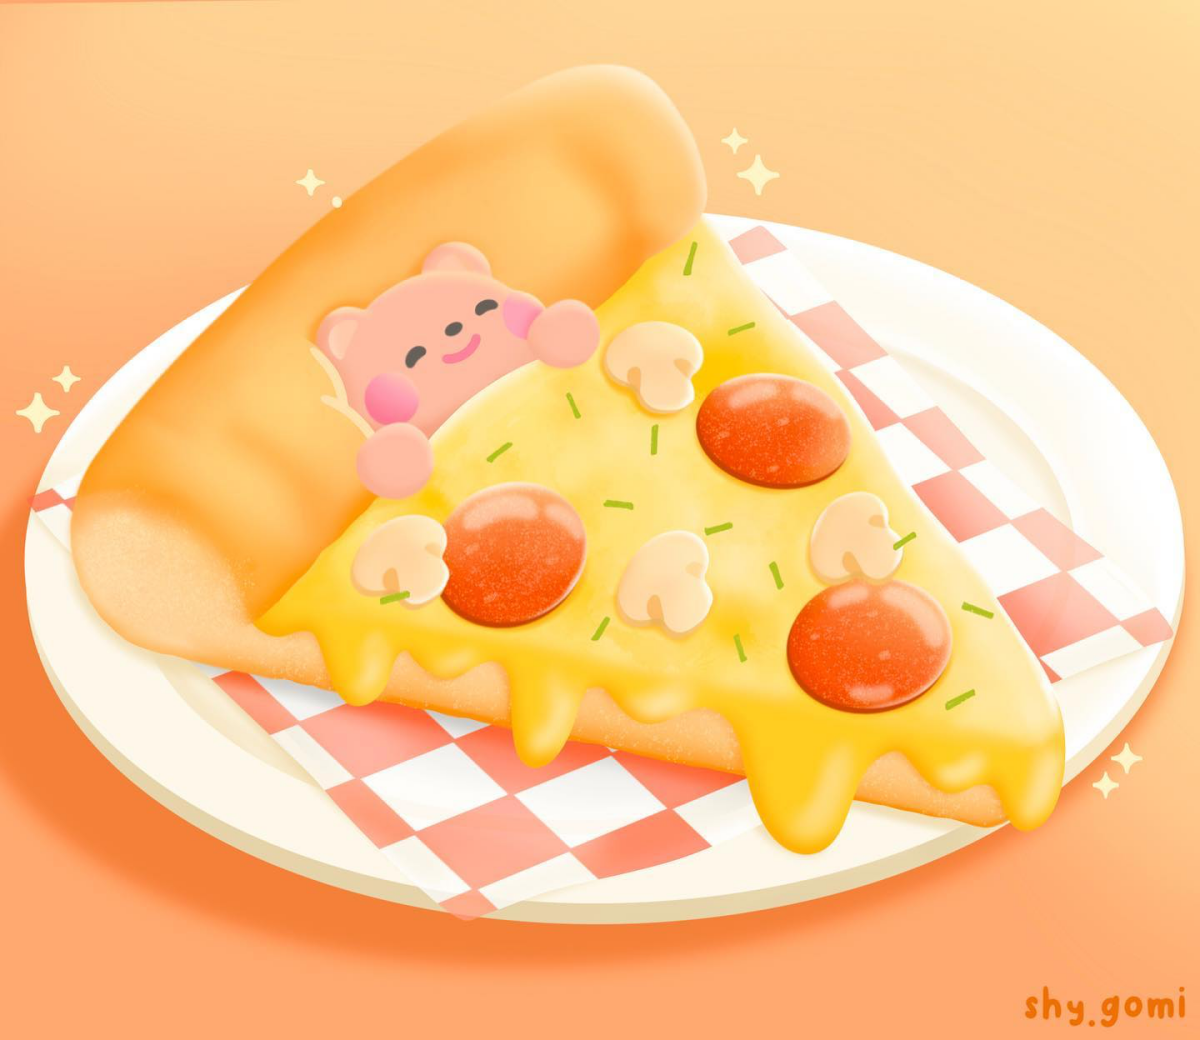 pizza drawing cute